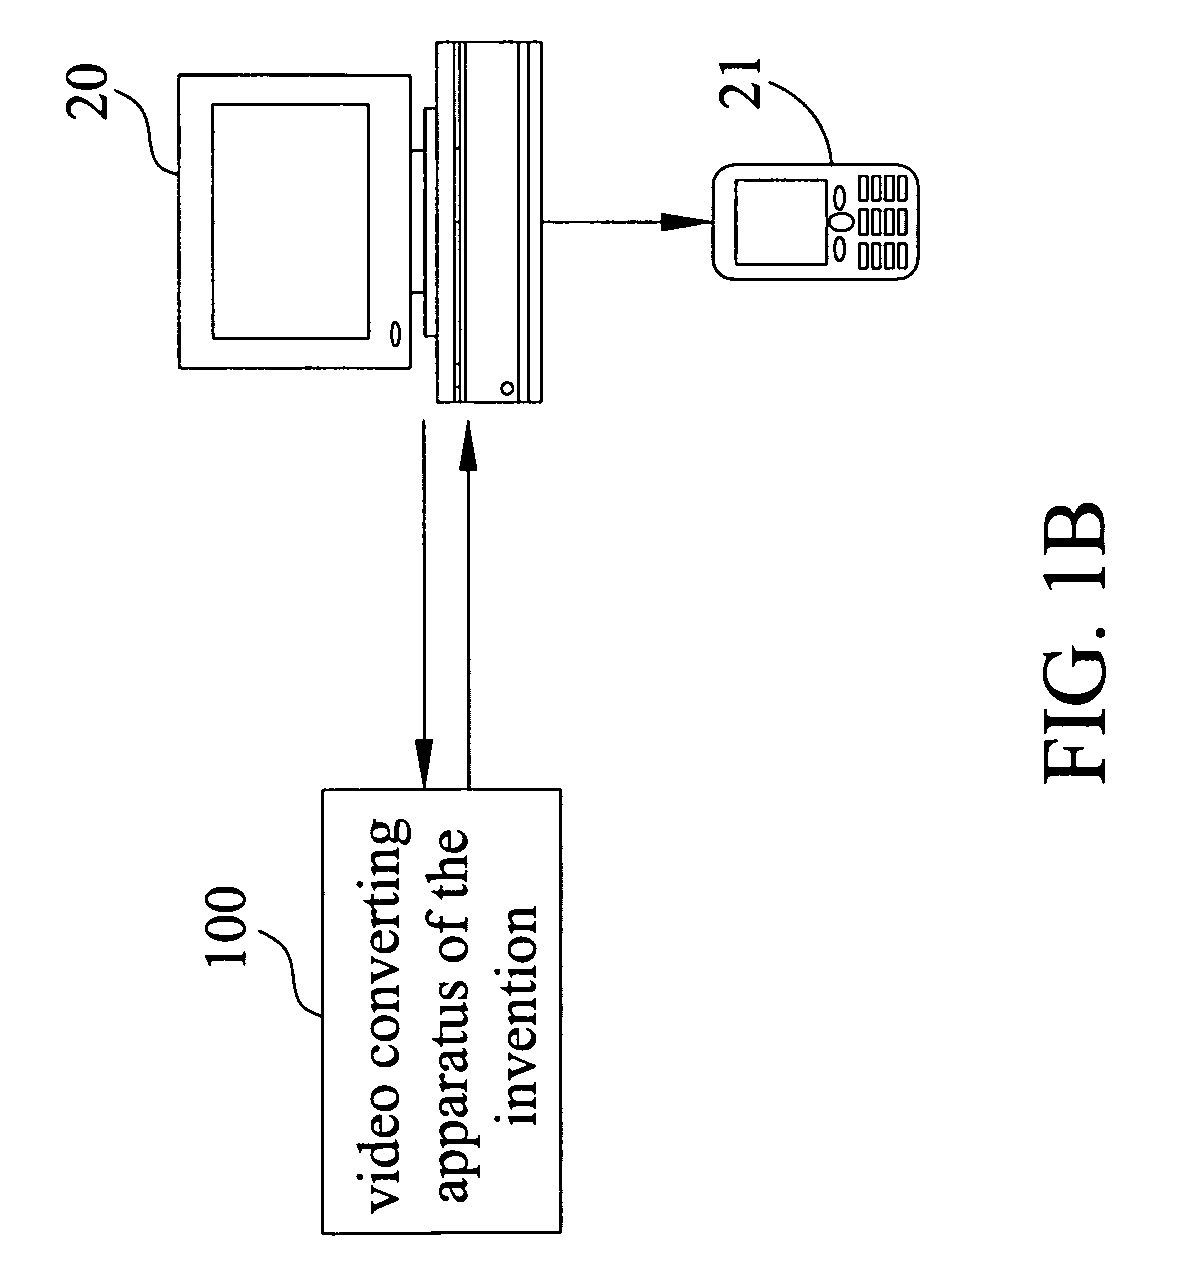 Schedulable multiple-formal video converting apparatus